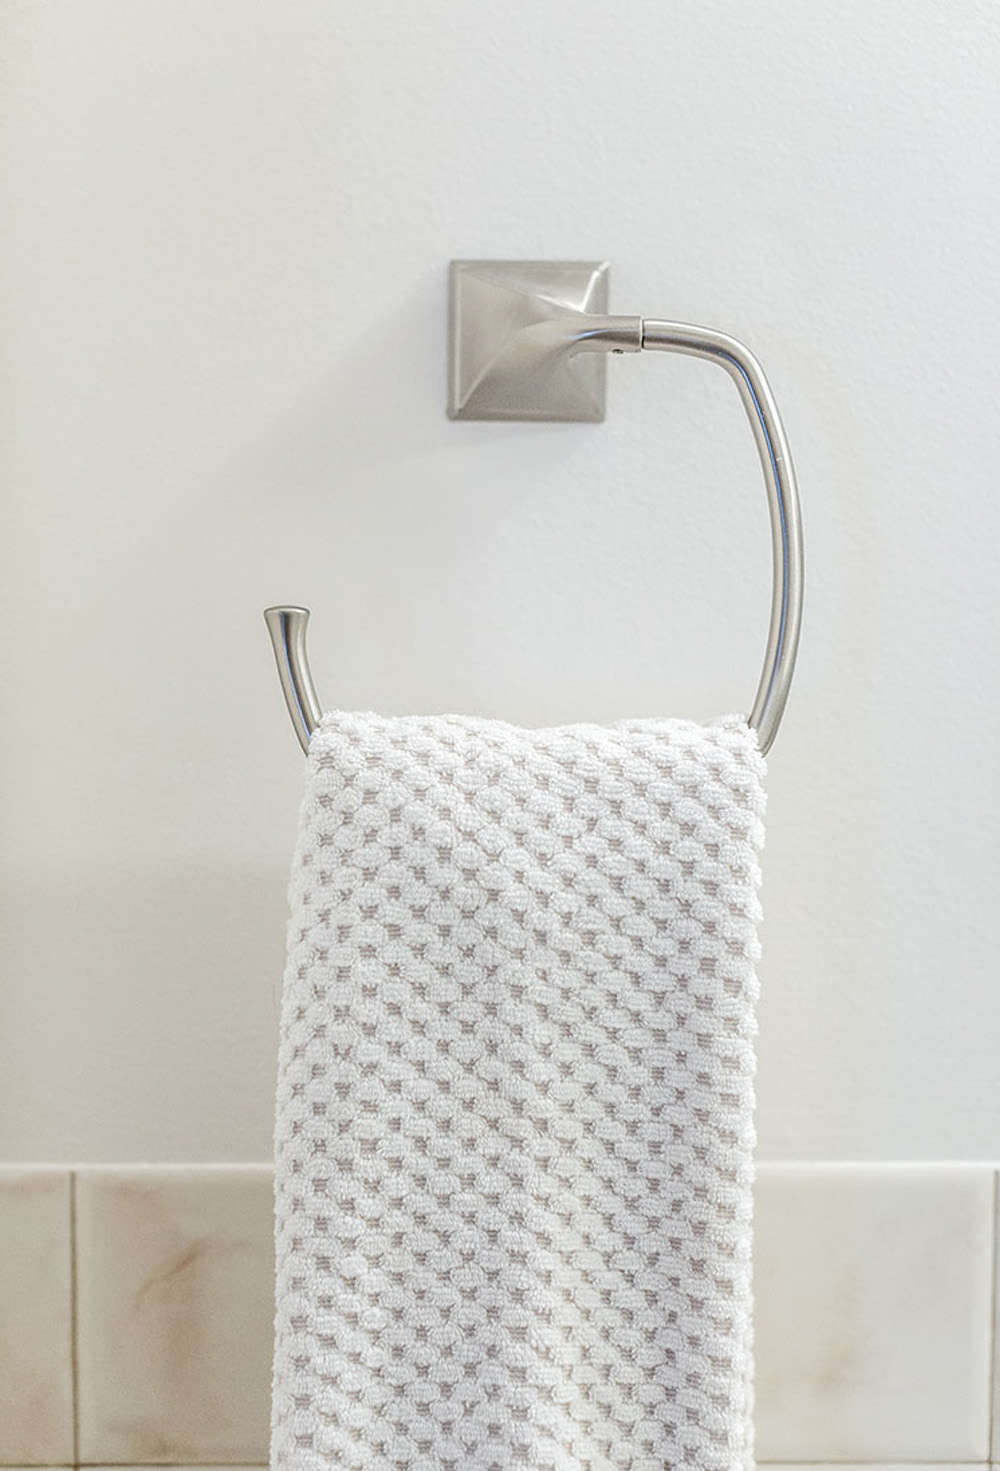 A silver hand towel holder with a white linen against a white and beige tiled wall.